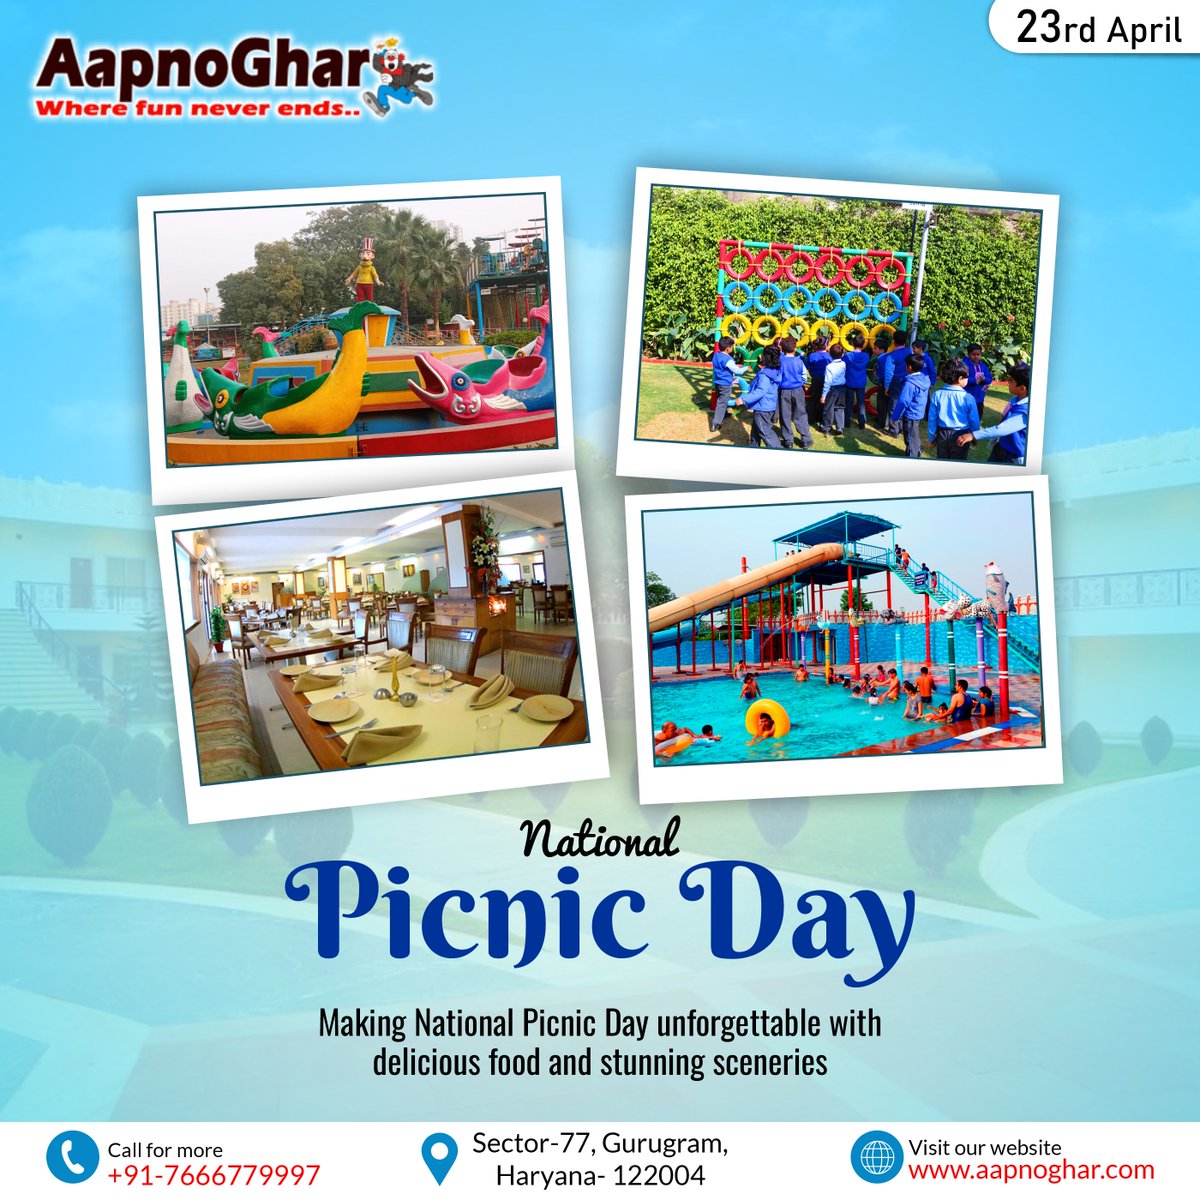 Don't miss out on the 𝐍𝐚𝐭𝐢𝐨𝐧𝐚𝐥 𝐏𝐢𝐜𝐧𝐢𝐜 𝐃𝐚𝐲 festivities at #aapnoghar #resort! Games, laughter, and unforgettable moments await
#nationalpicnicday #picnic #picnictime #picnic2024 #picnicfood #picnicday #picnicday2024 #Delhi #Gurgaon #schools #SummerVibes #vacations